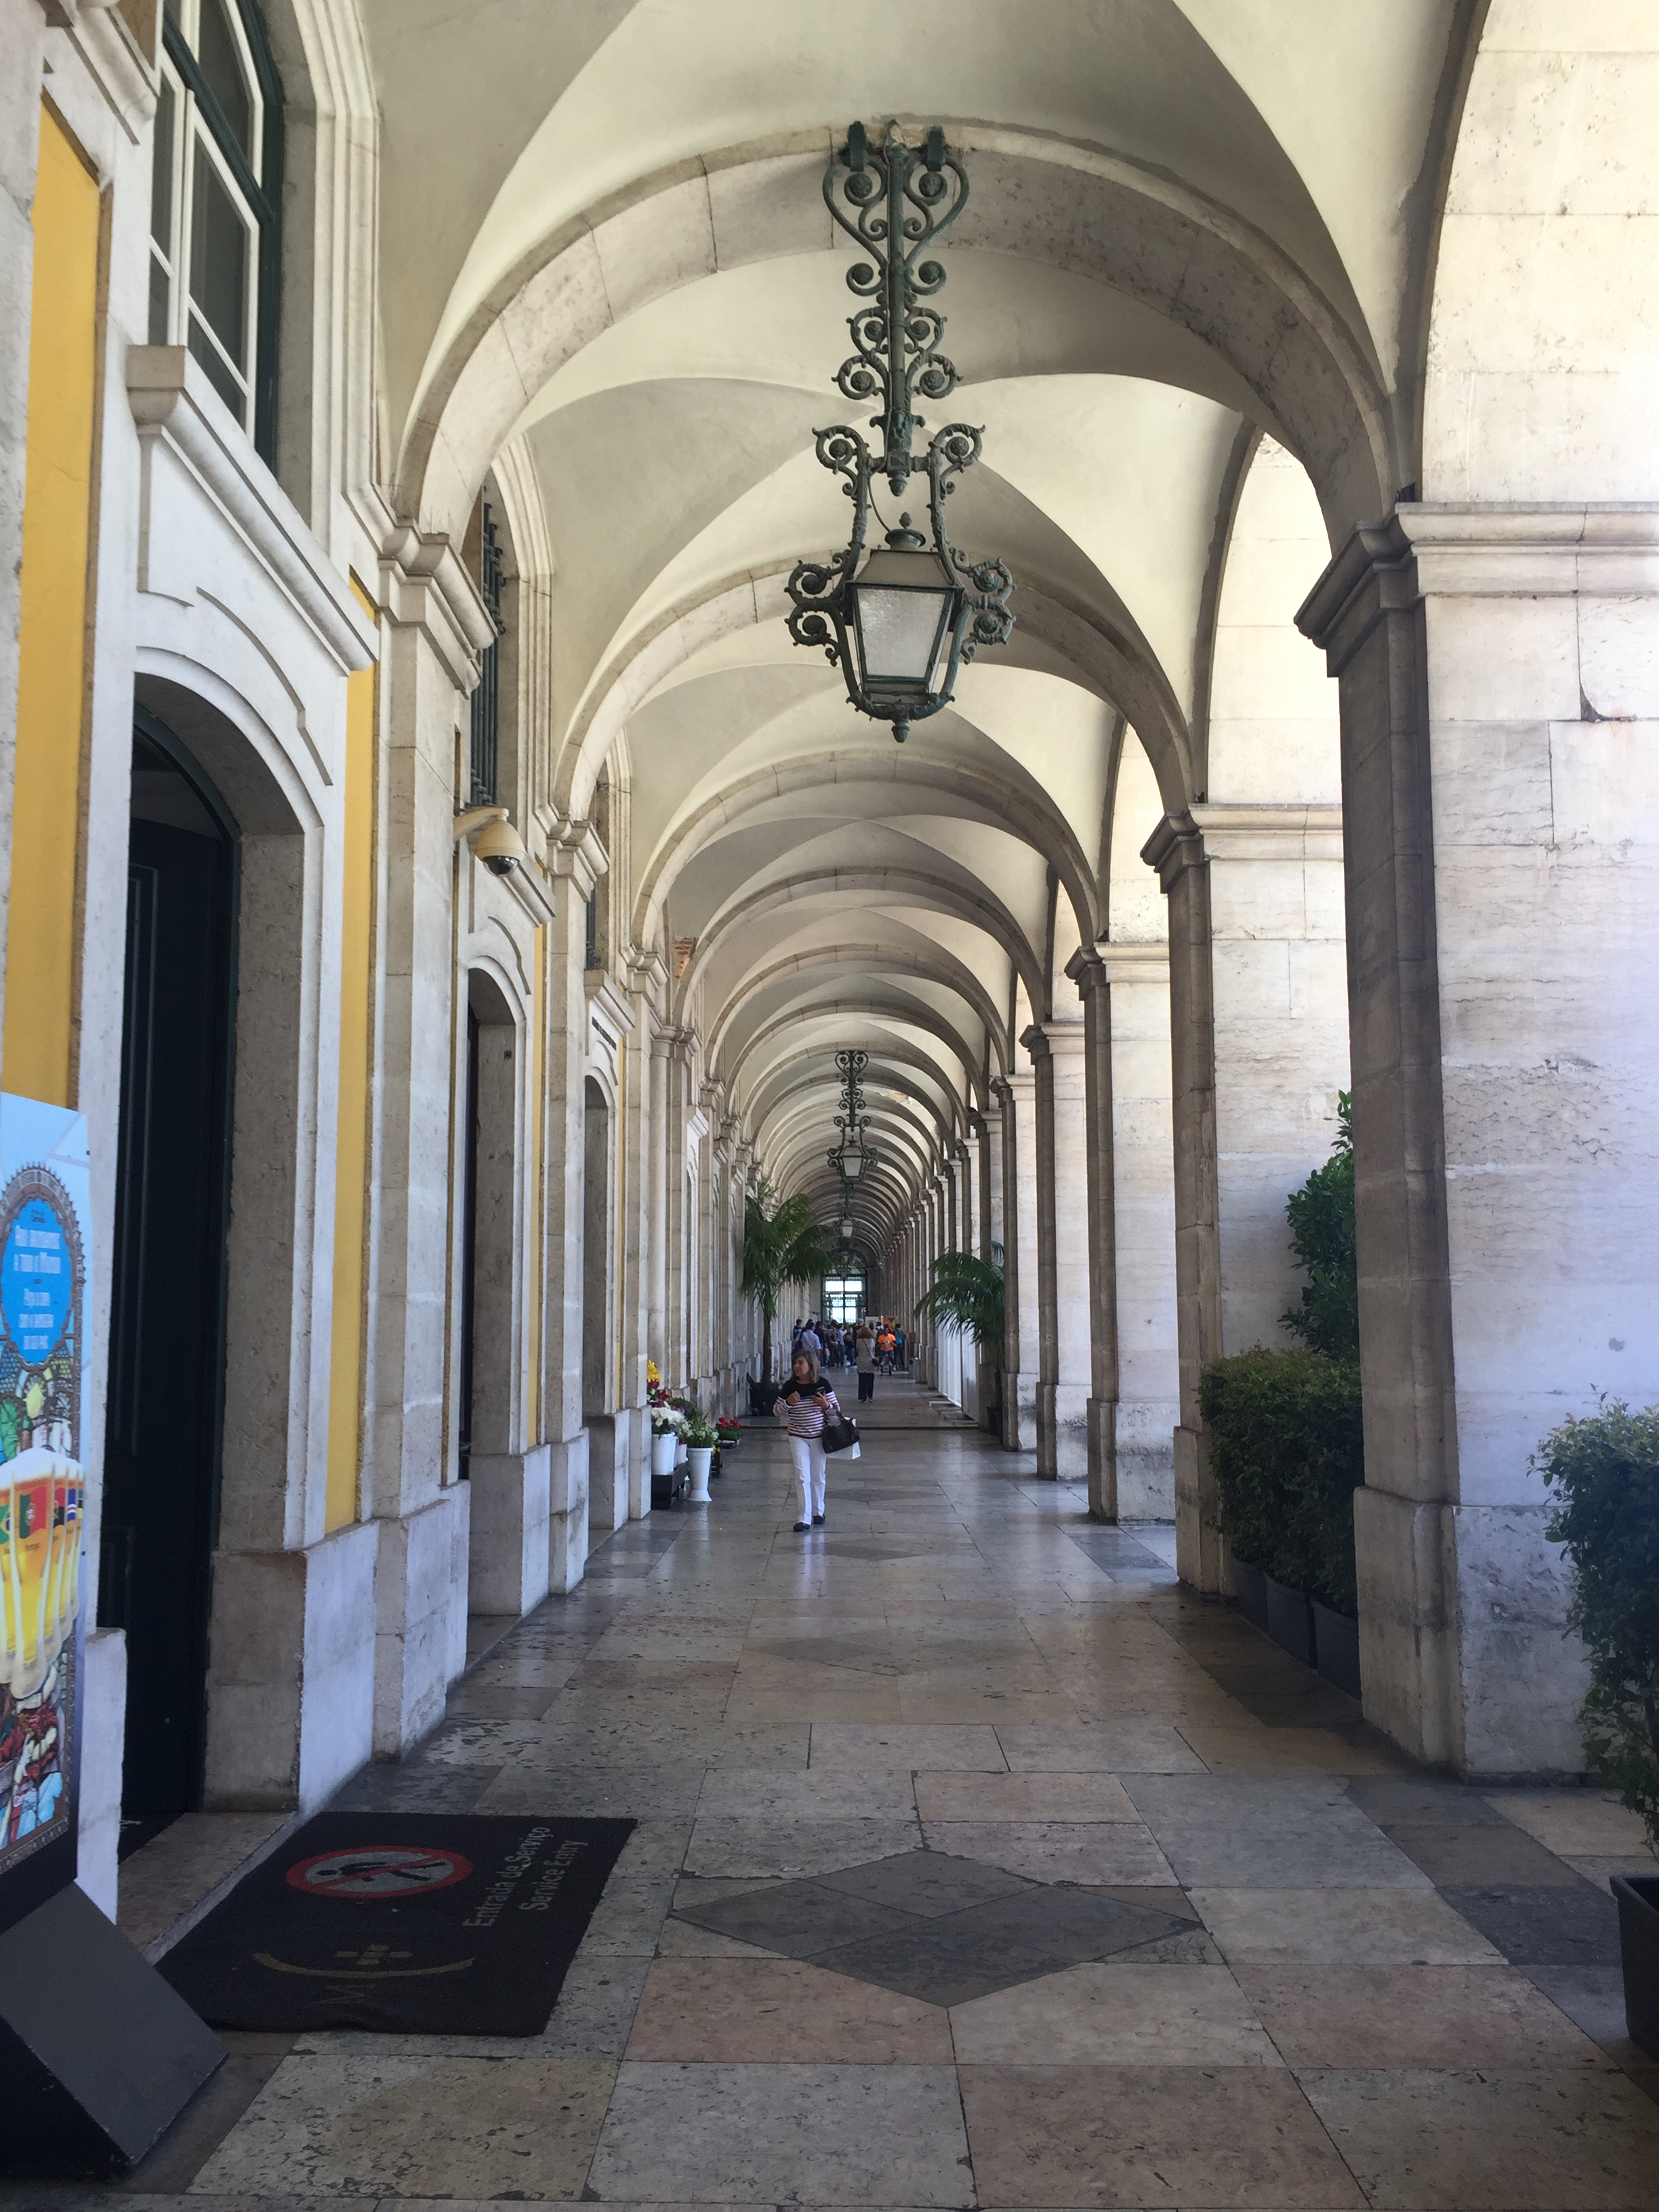 Add Baixa to your itinerary for Lisbon